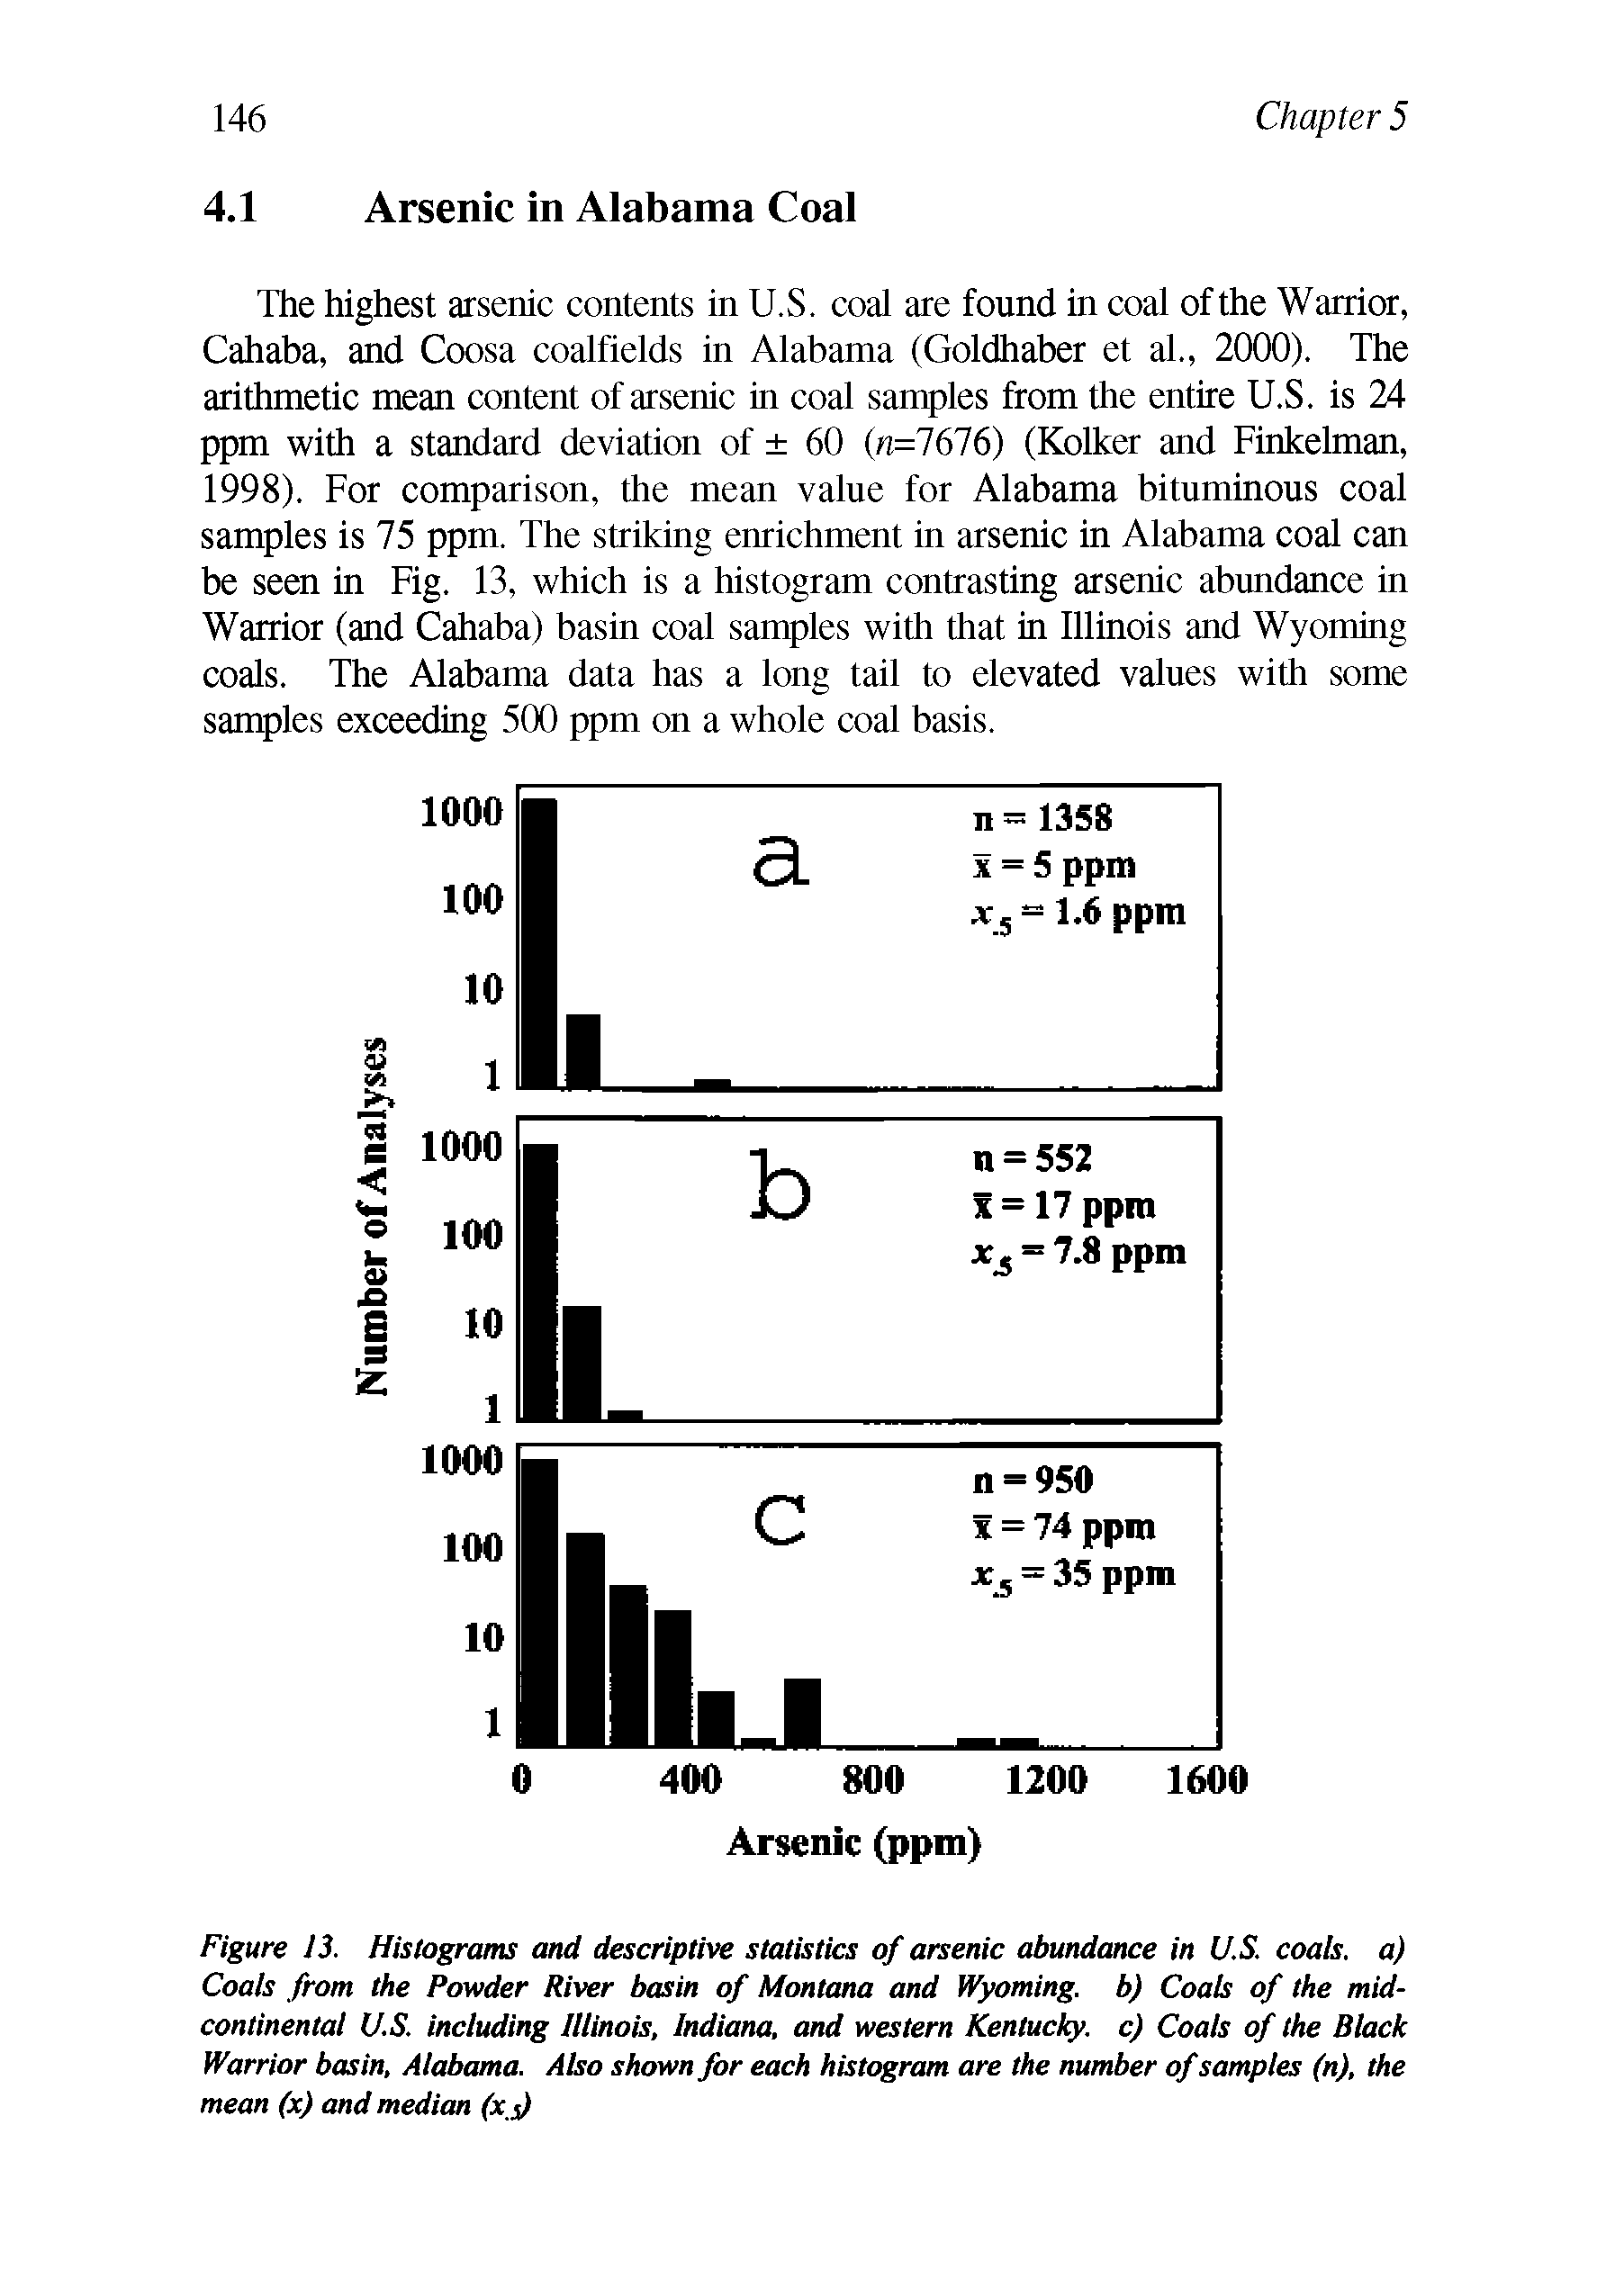 Figure 13. Histograms and descriptive statistics of arsenic abundance in U.S. coals, a) Coals from the Powder River basin of Montana and Wyoming, b) Coals of the midcontinental U.S. including Illinois, Indiana, and western Kentuclq/. c) Coals of the Black Warrior basin, Alabama. Also shown for each histogram are the number of samples (n), the mean (x) and median (x,s)...